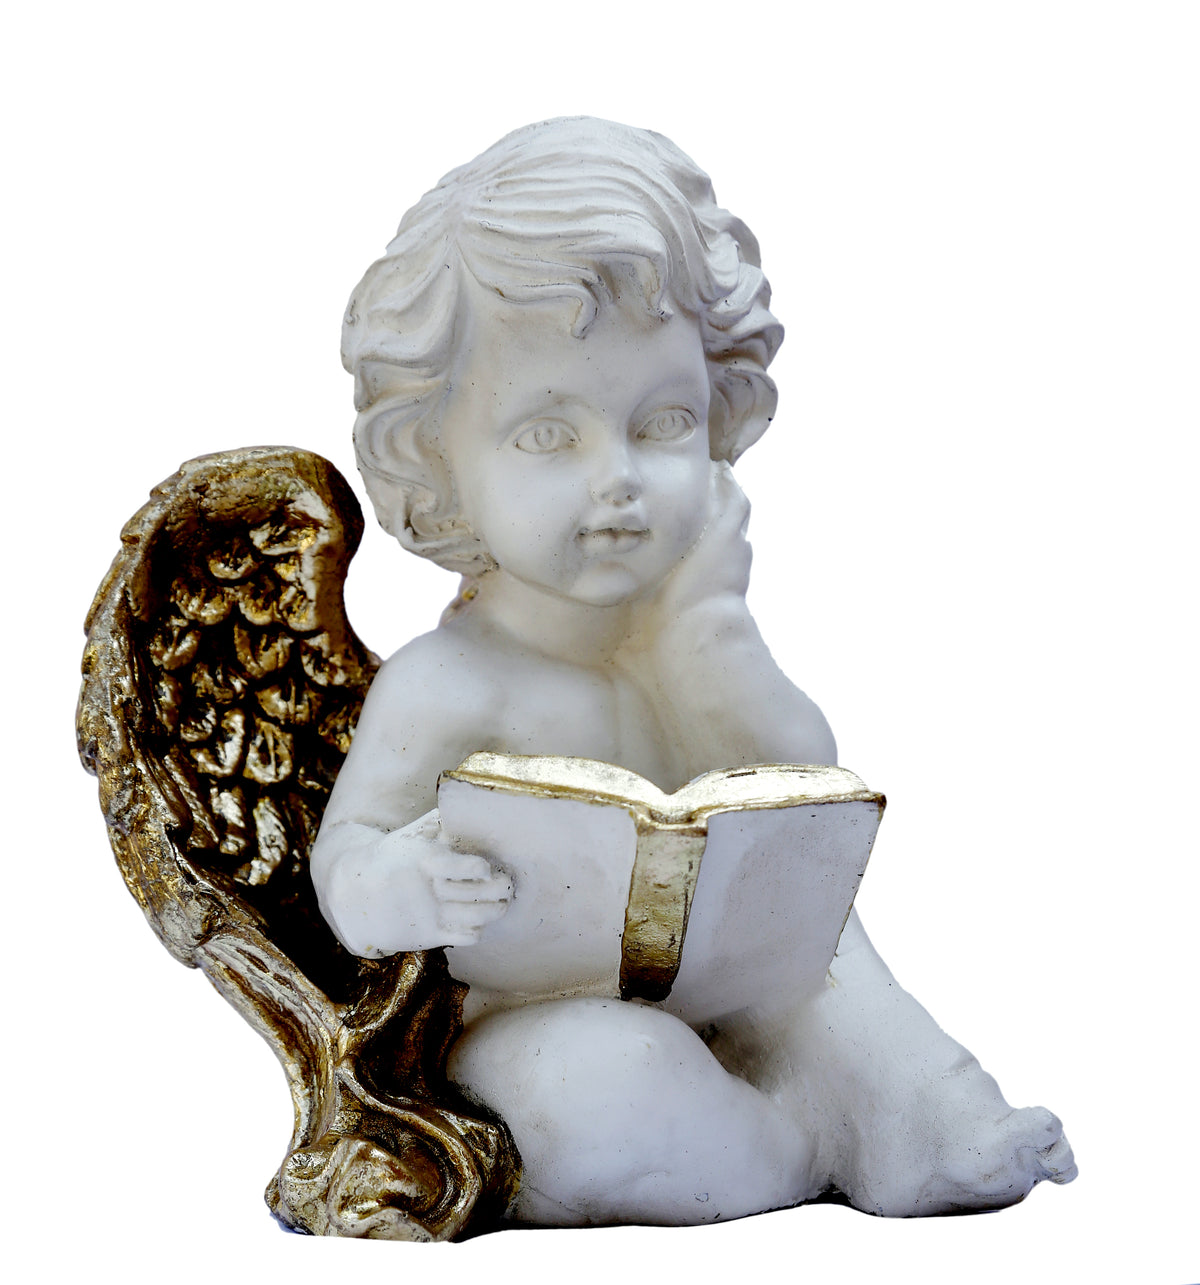 The Lucky Angel showpiece for desk